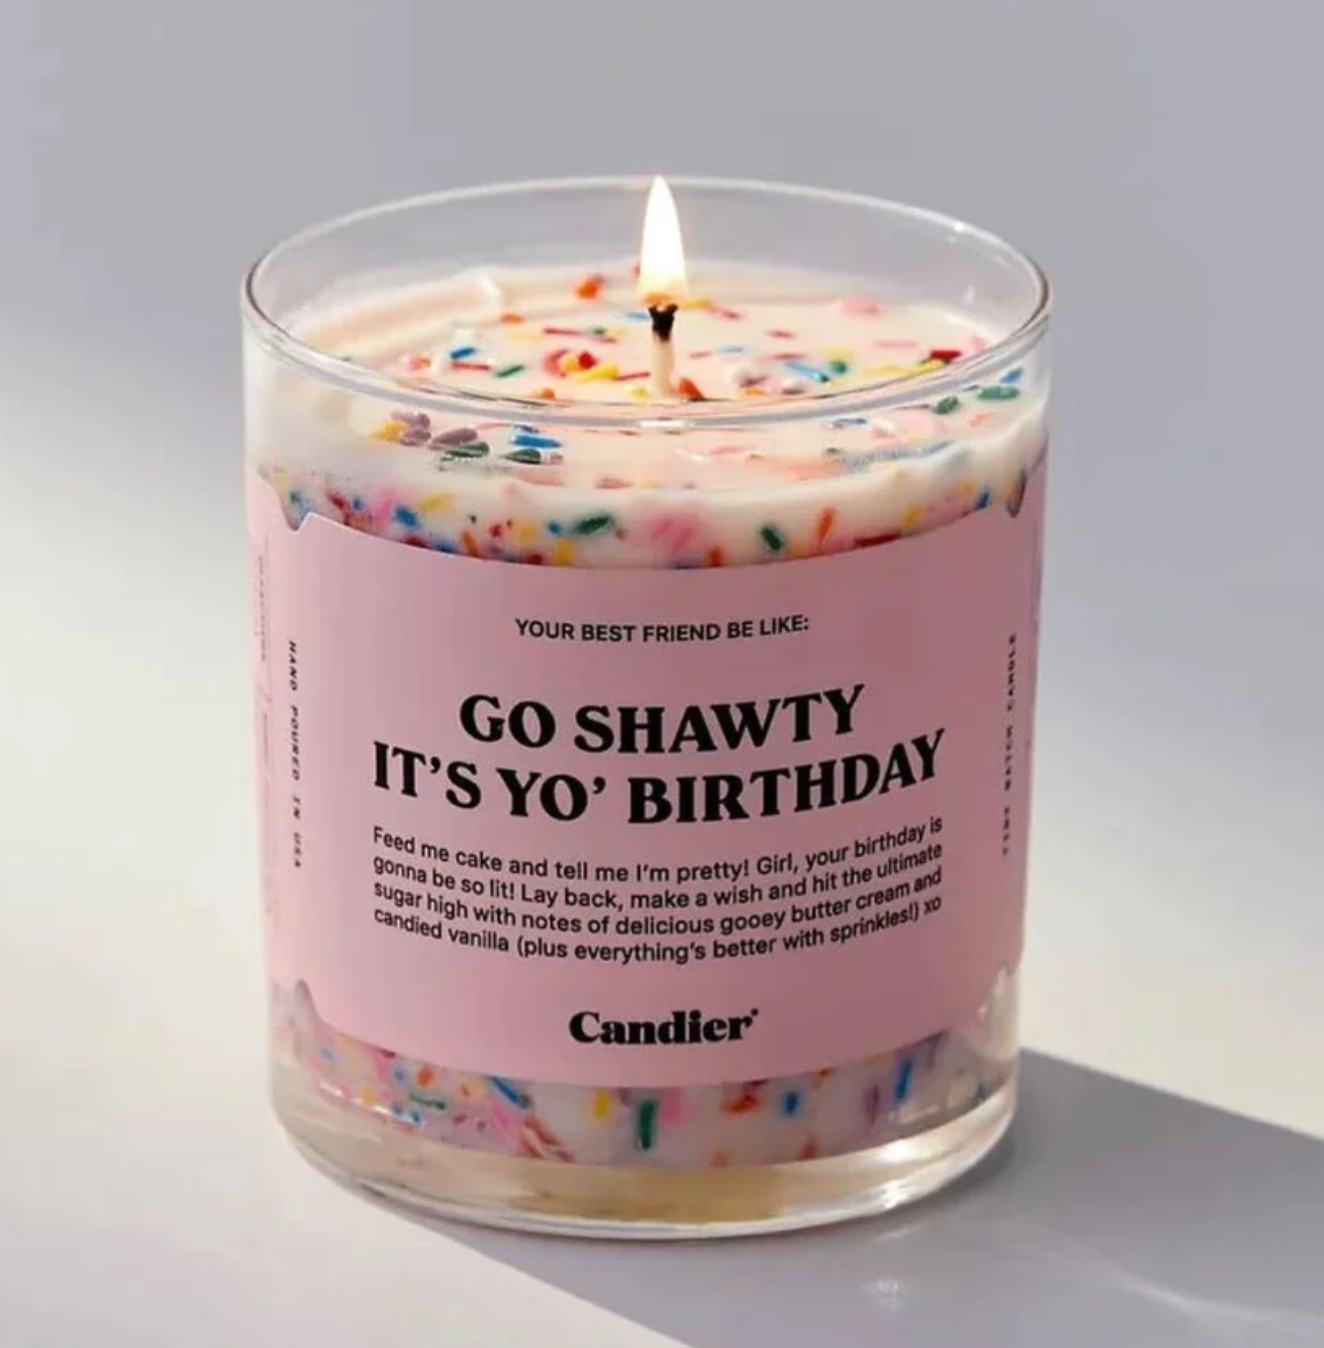 Go Shawty, it's Your Birthday Candle